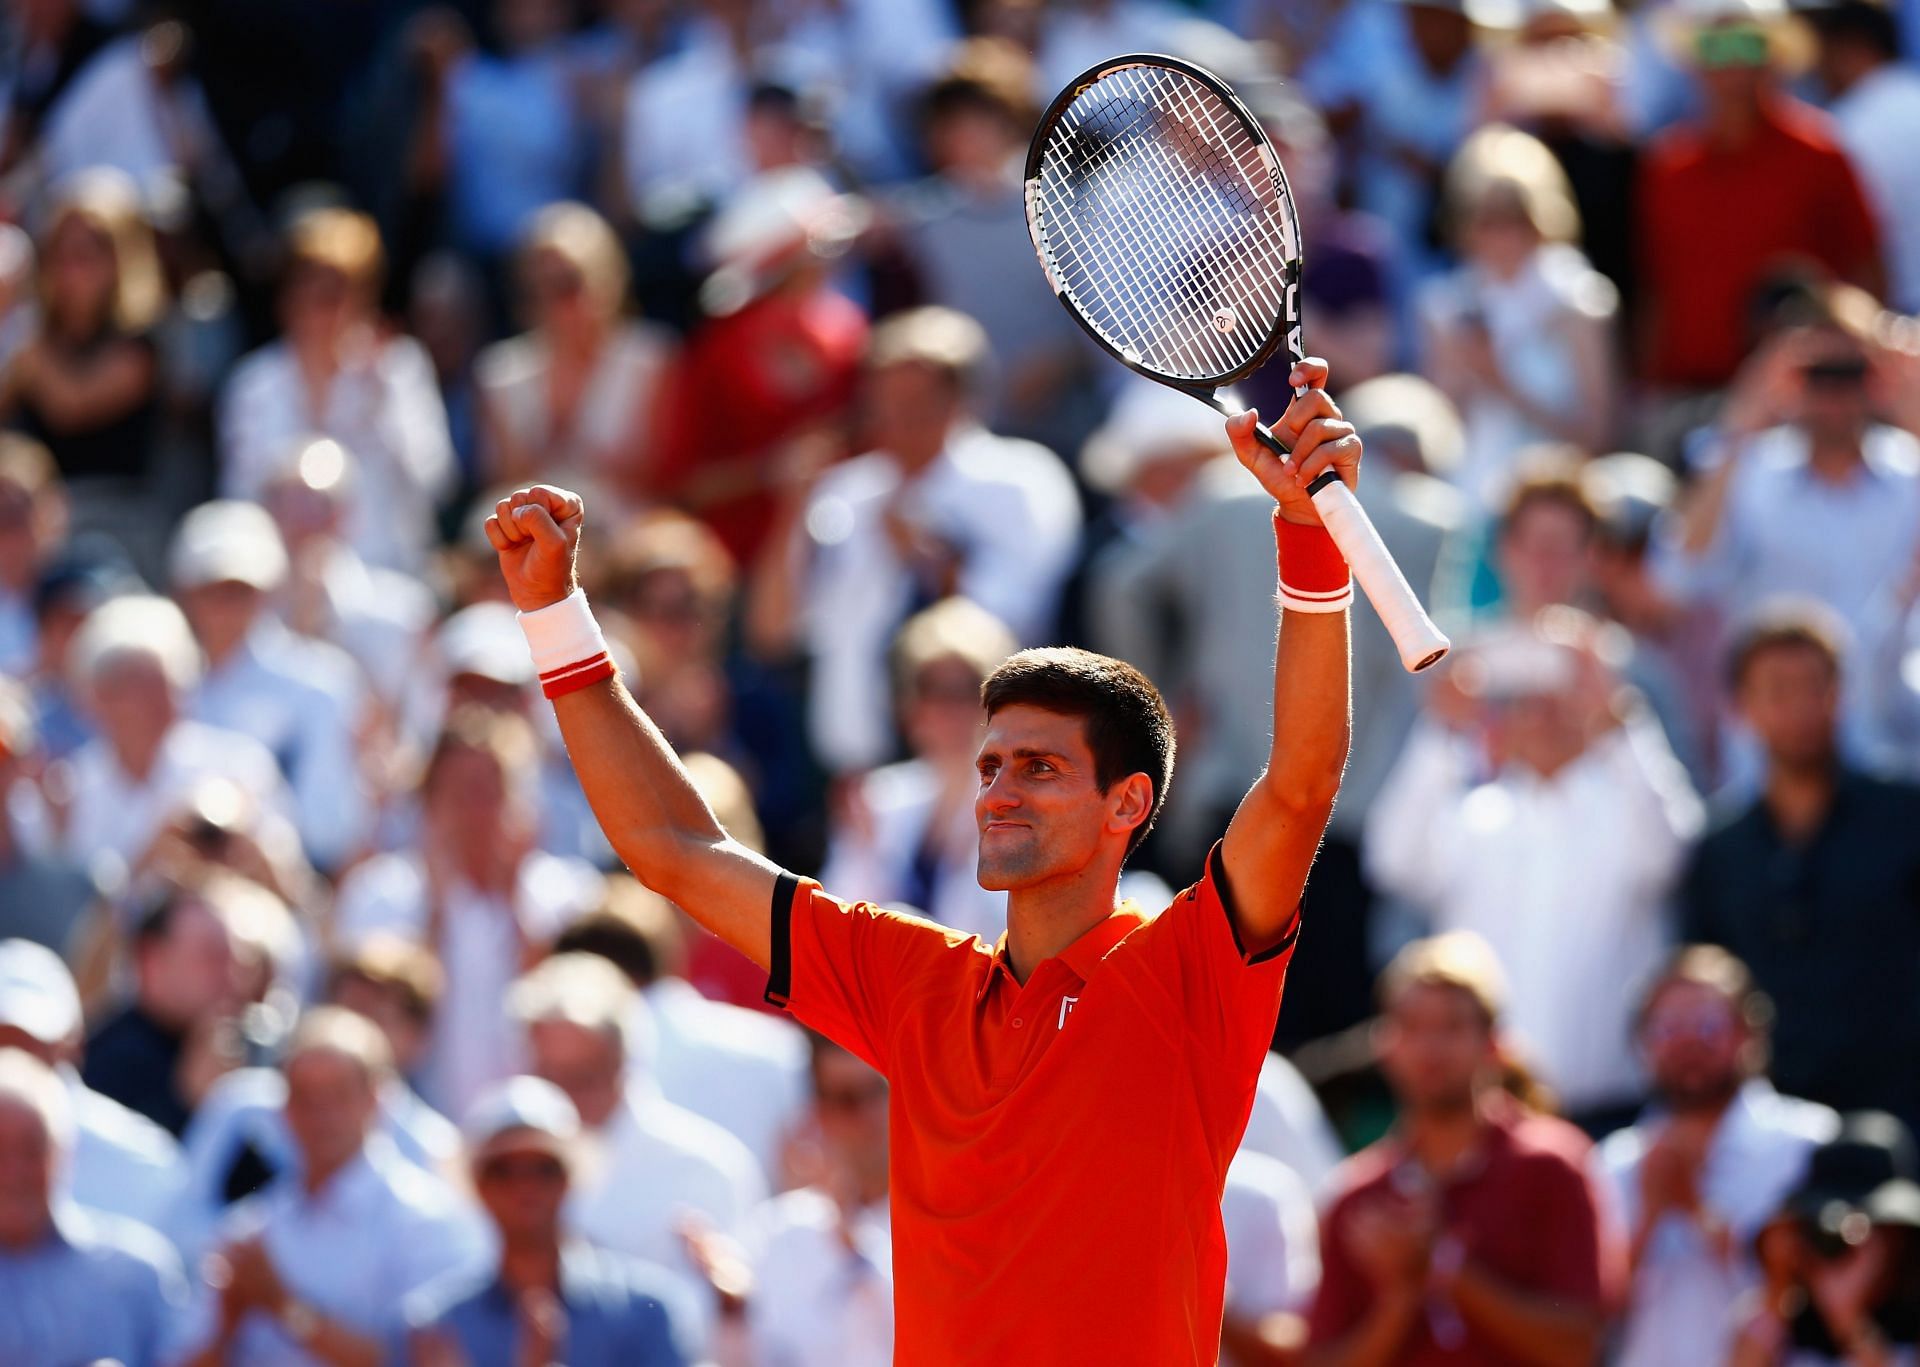 Novak Djokovic celebrates his win against Rafael Nadal at the quarterfinals of the French Open in 2015